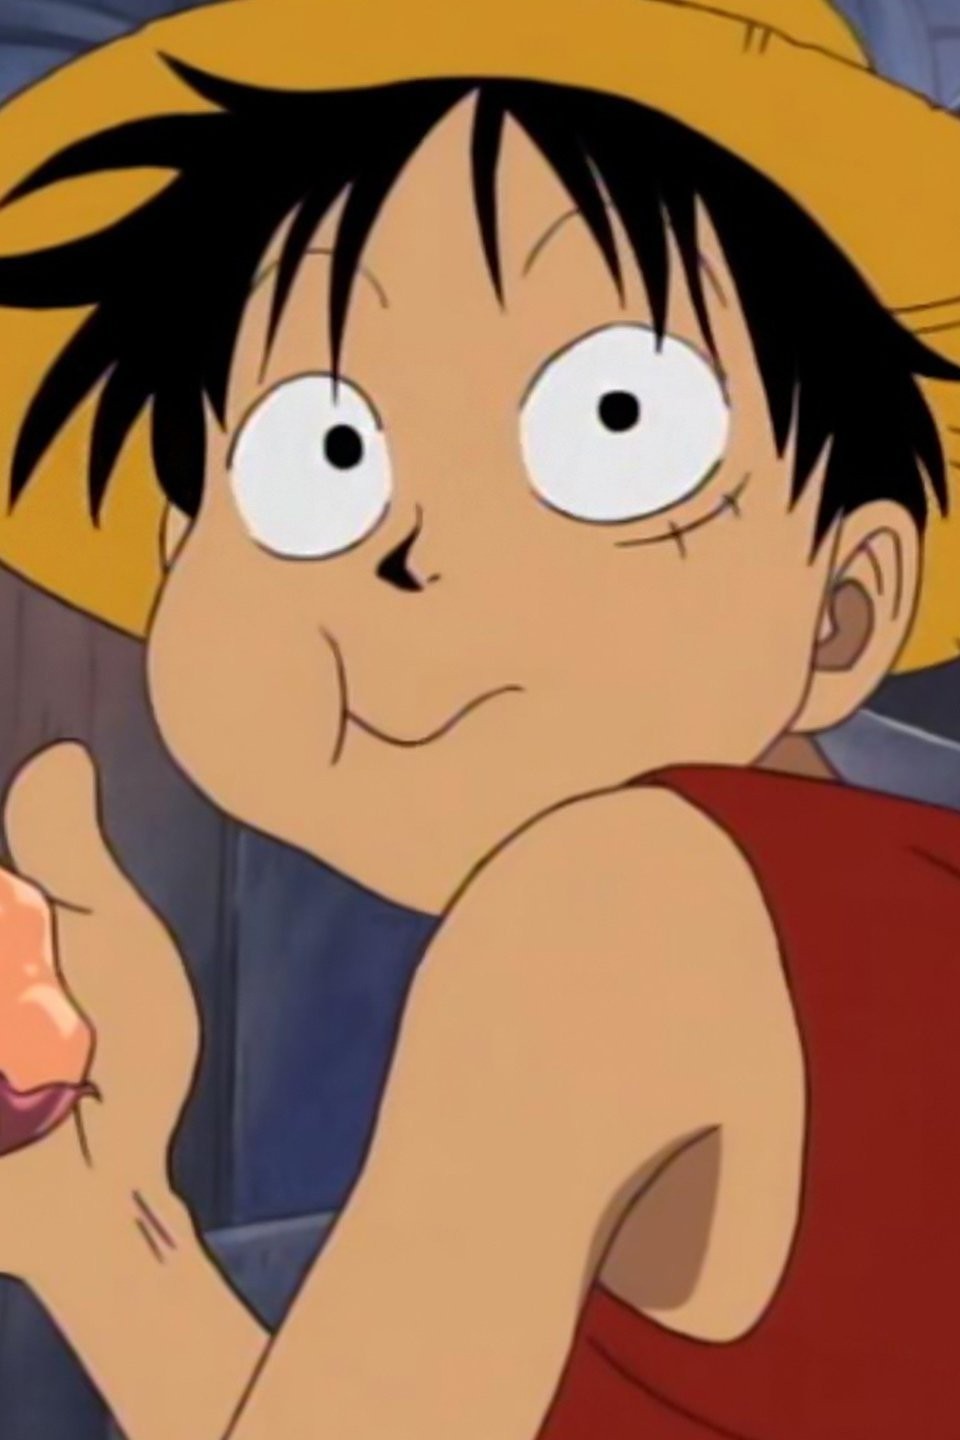 One Piece Episode 1 I'm Luffy! The Man Who Will Become the Pirate